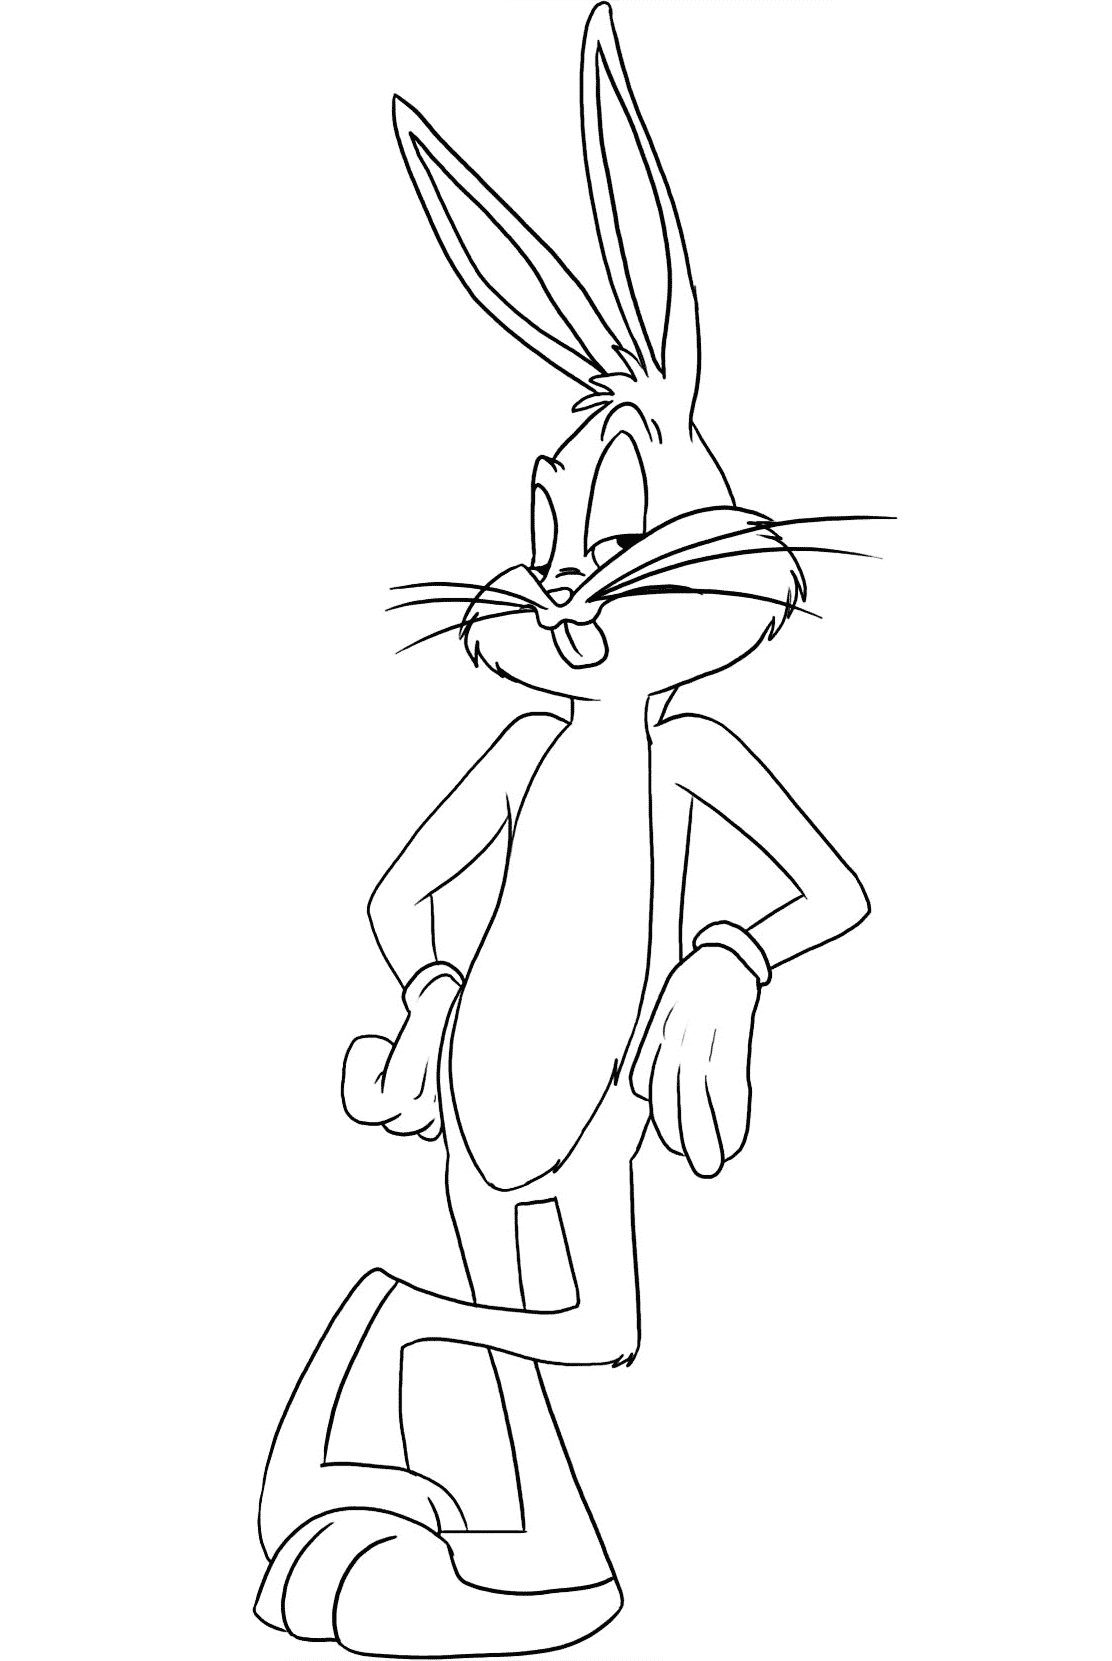 Looney Tunes Bugs Bunny Coloring Pages